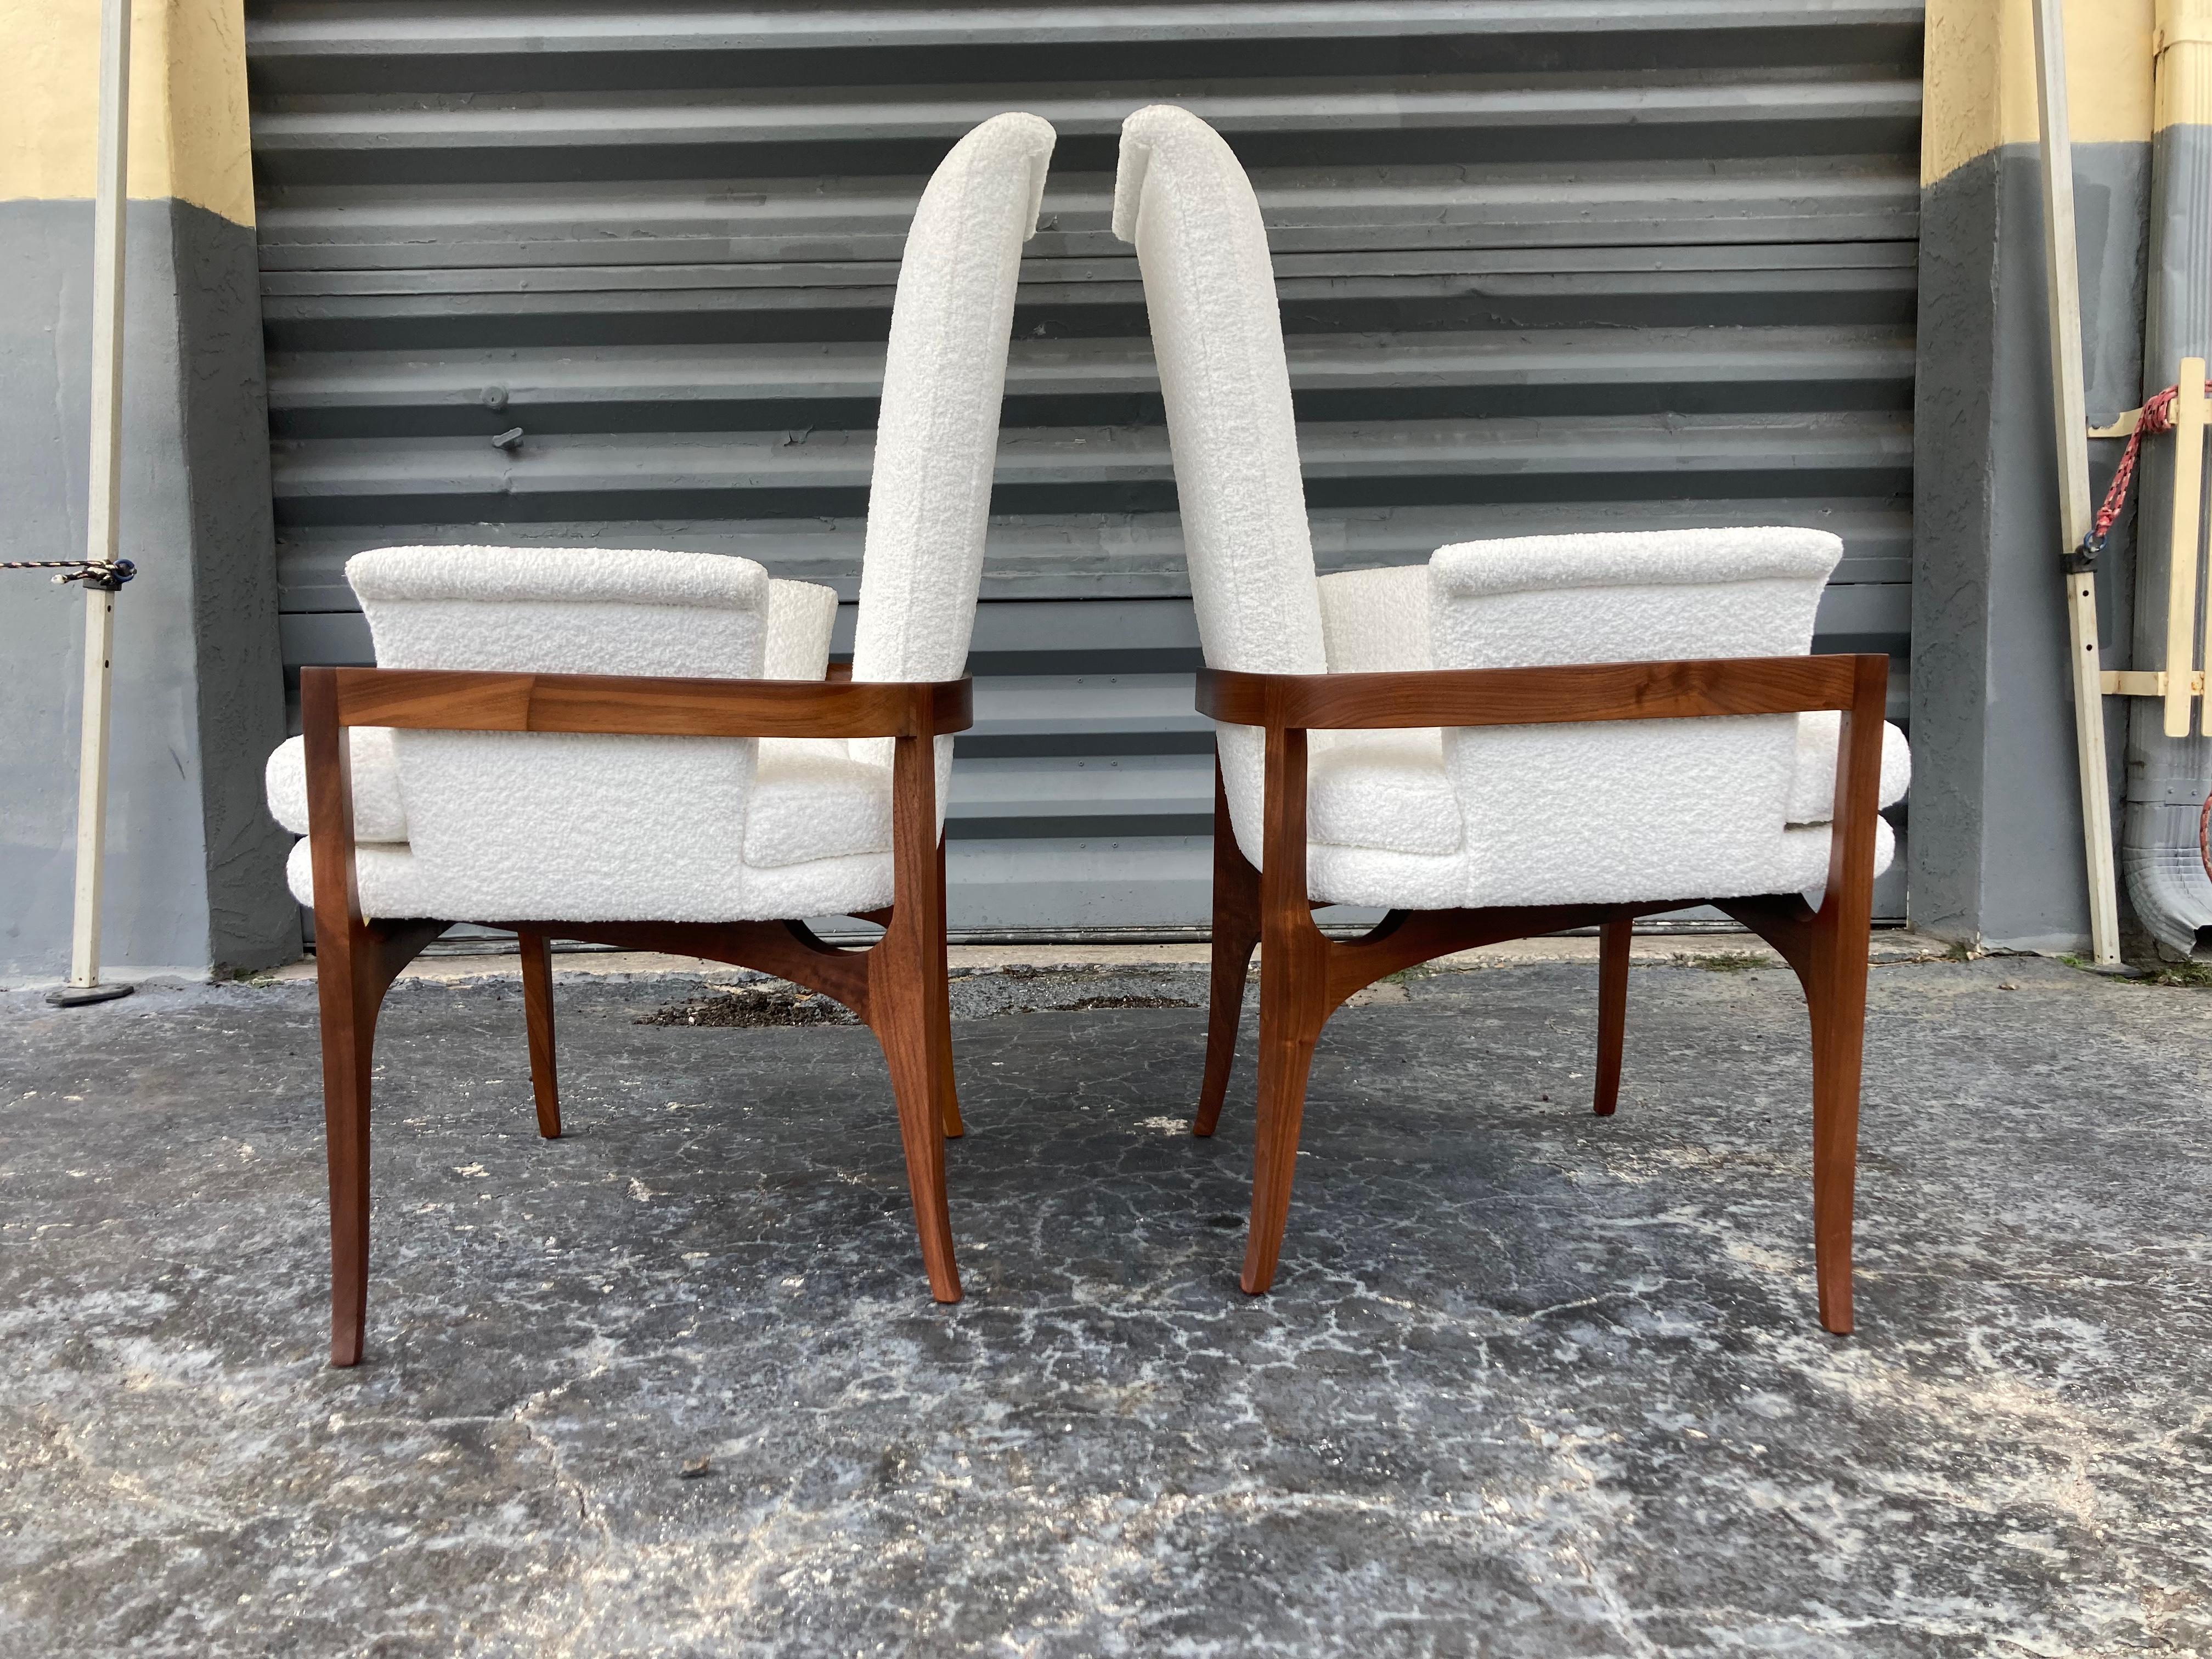 Sculptural Mid-Century Modern Lounge Chairs, Walnut and White Boucle Fabric In Excellent Condition For Sale In Miami, FL